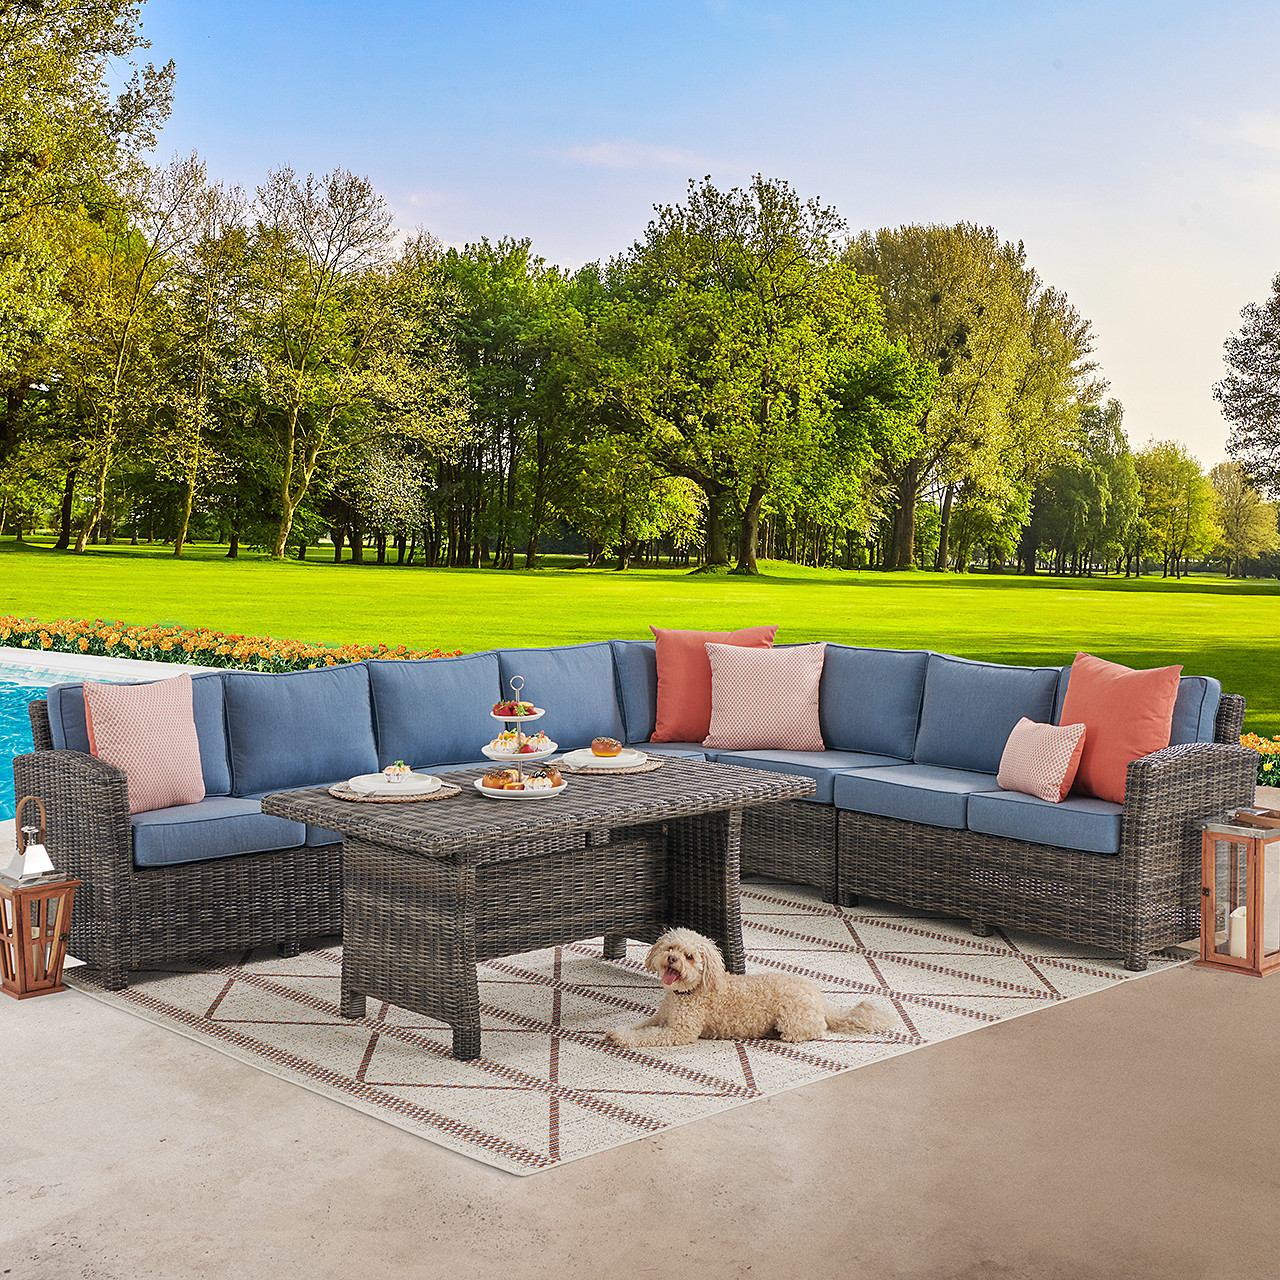 Venice Silver Oak Outdoor Wicker with Cushions 7 Piece Sectional + 59 x 32 in. Woven Top Lounge Table